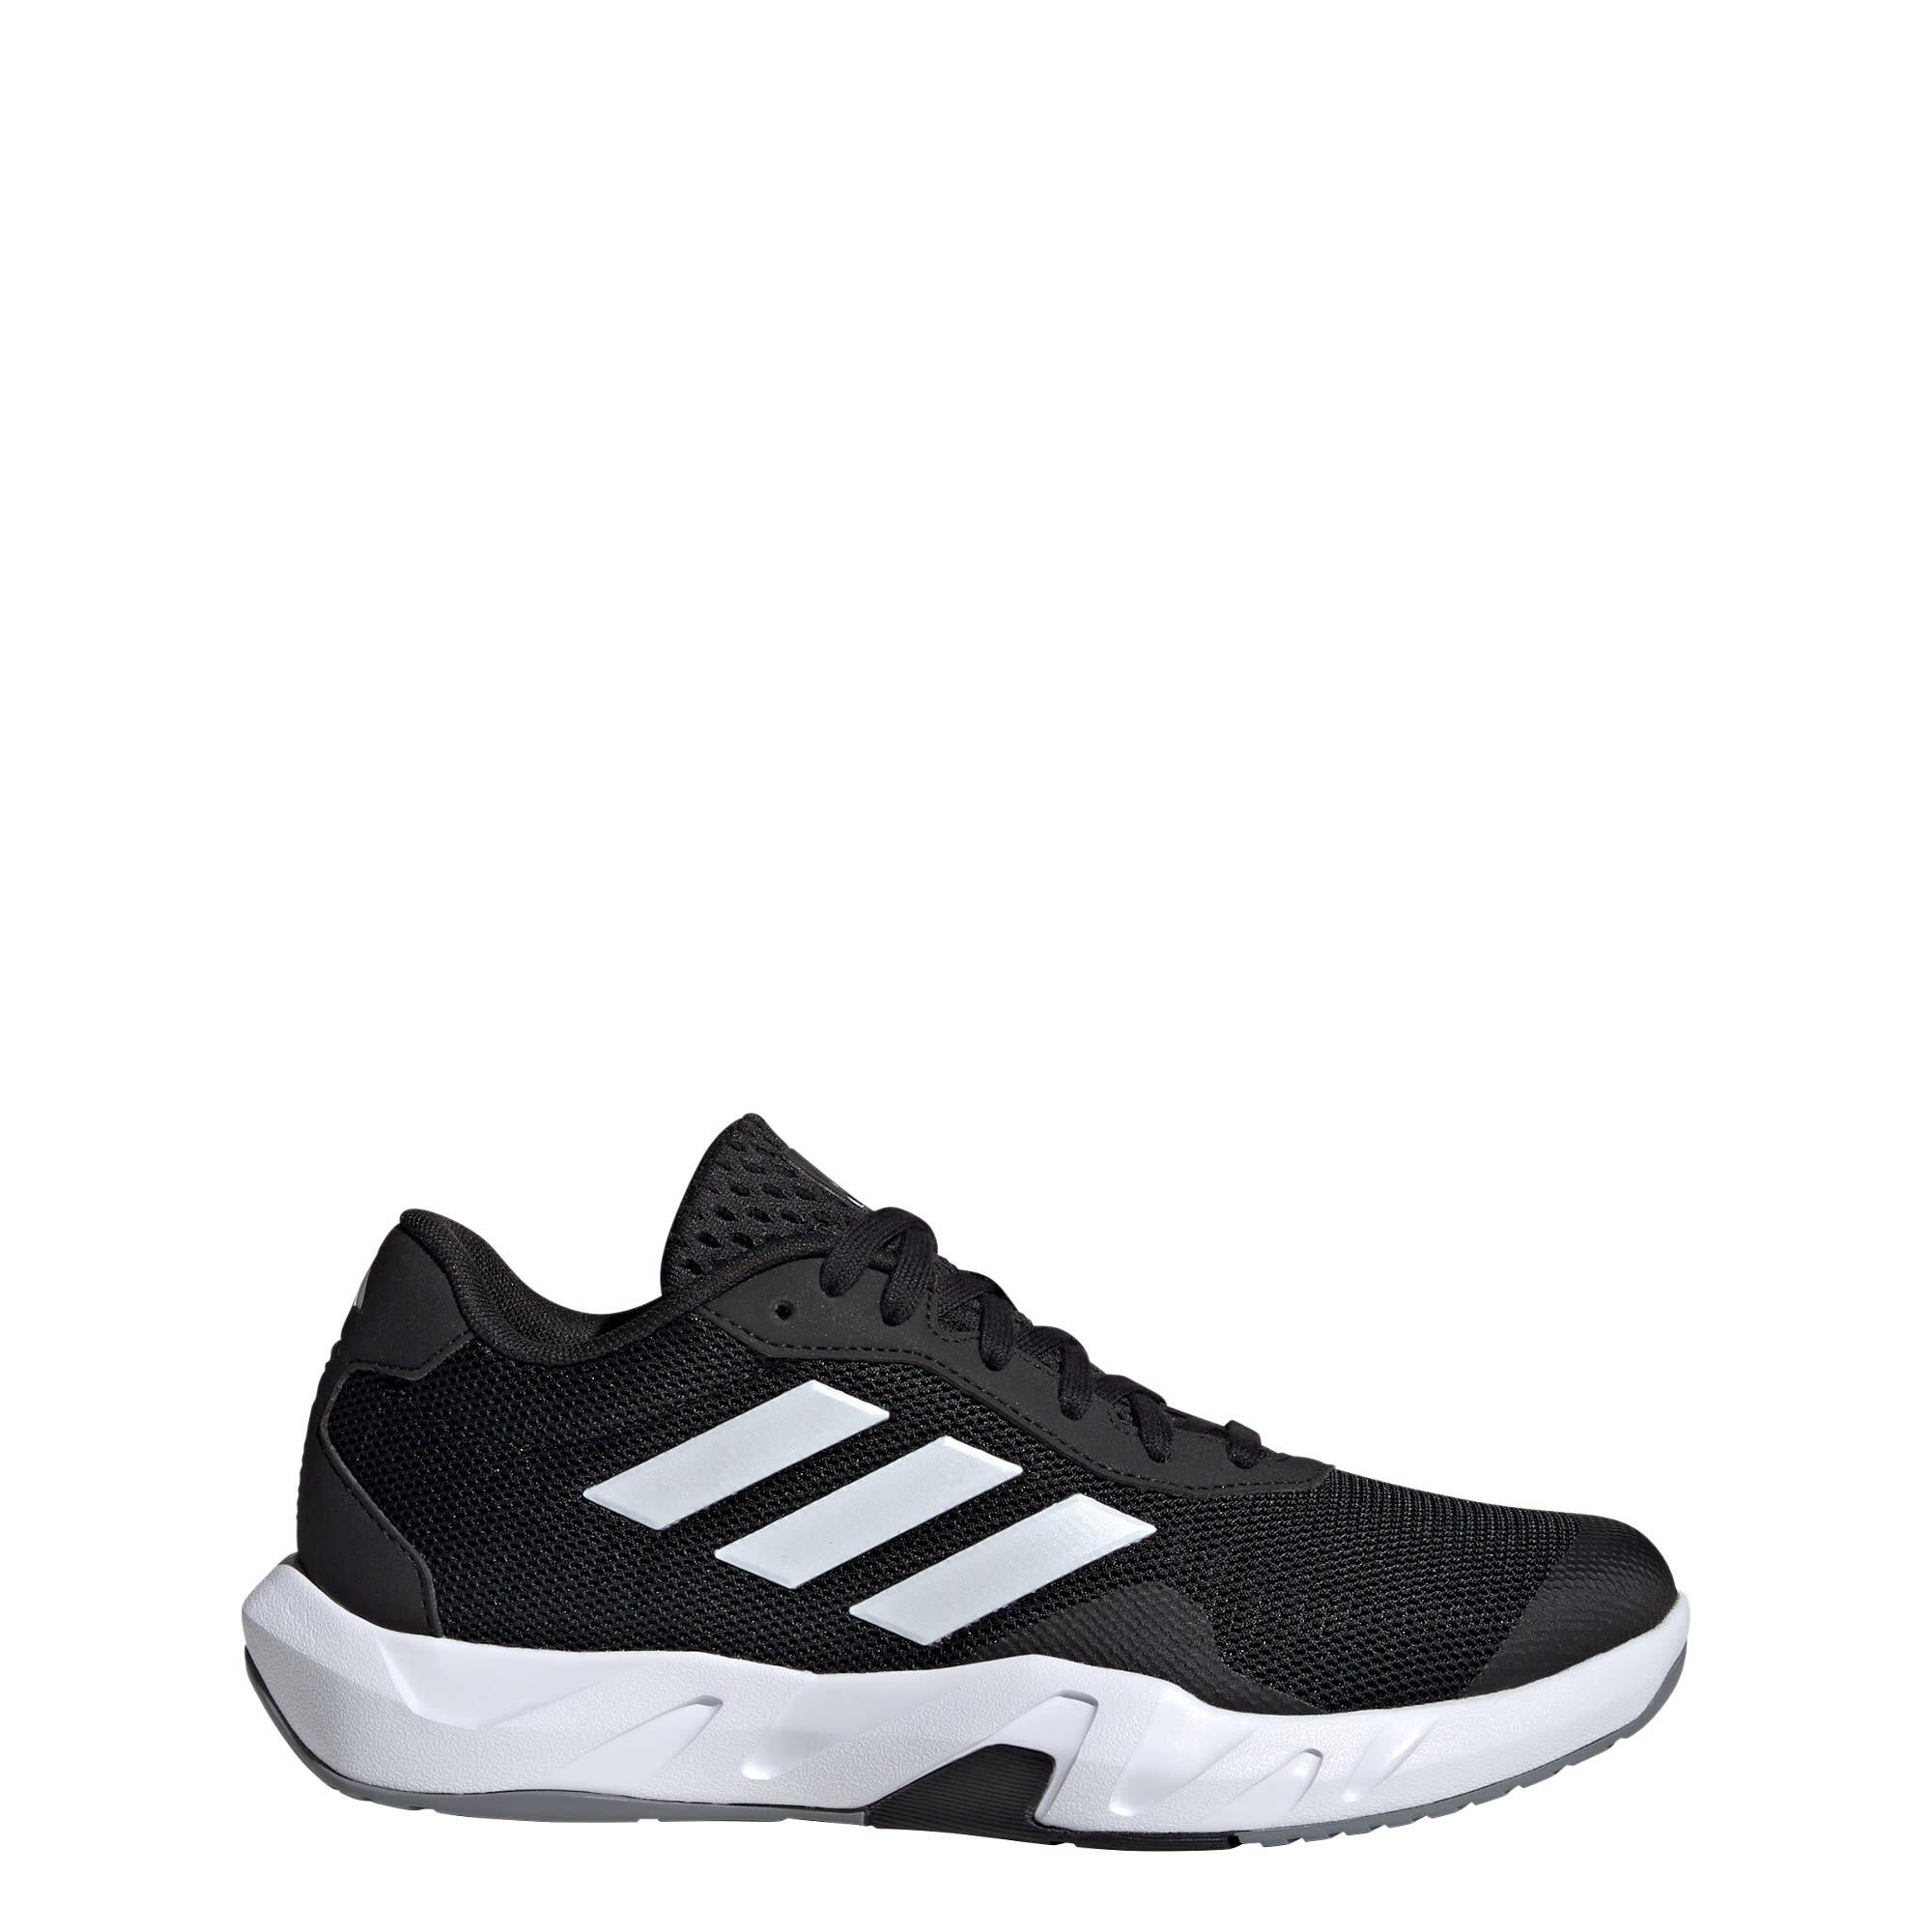 ADIDAS Amplimove Trainer Shoes